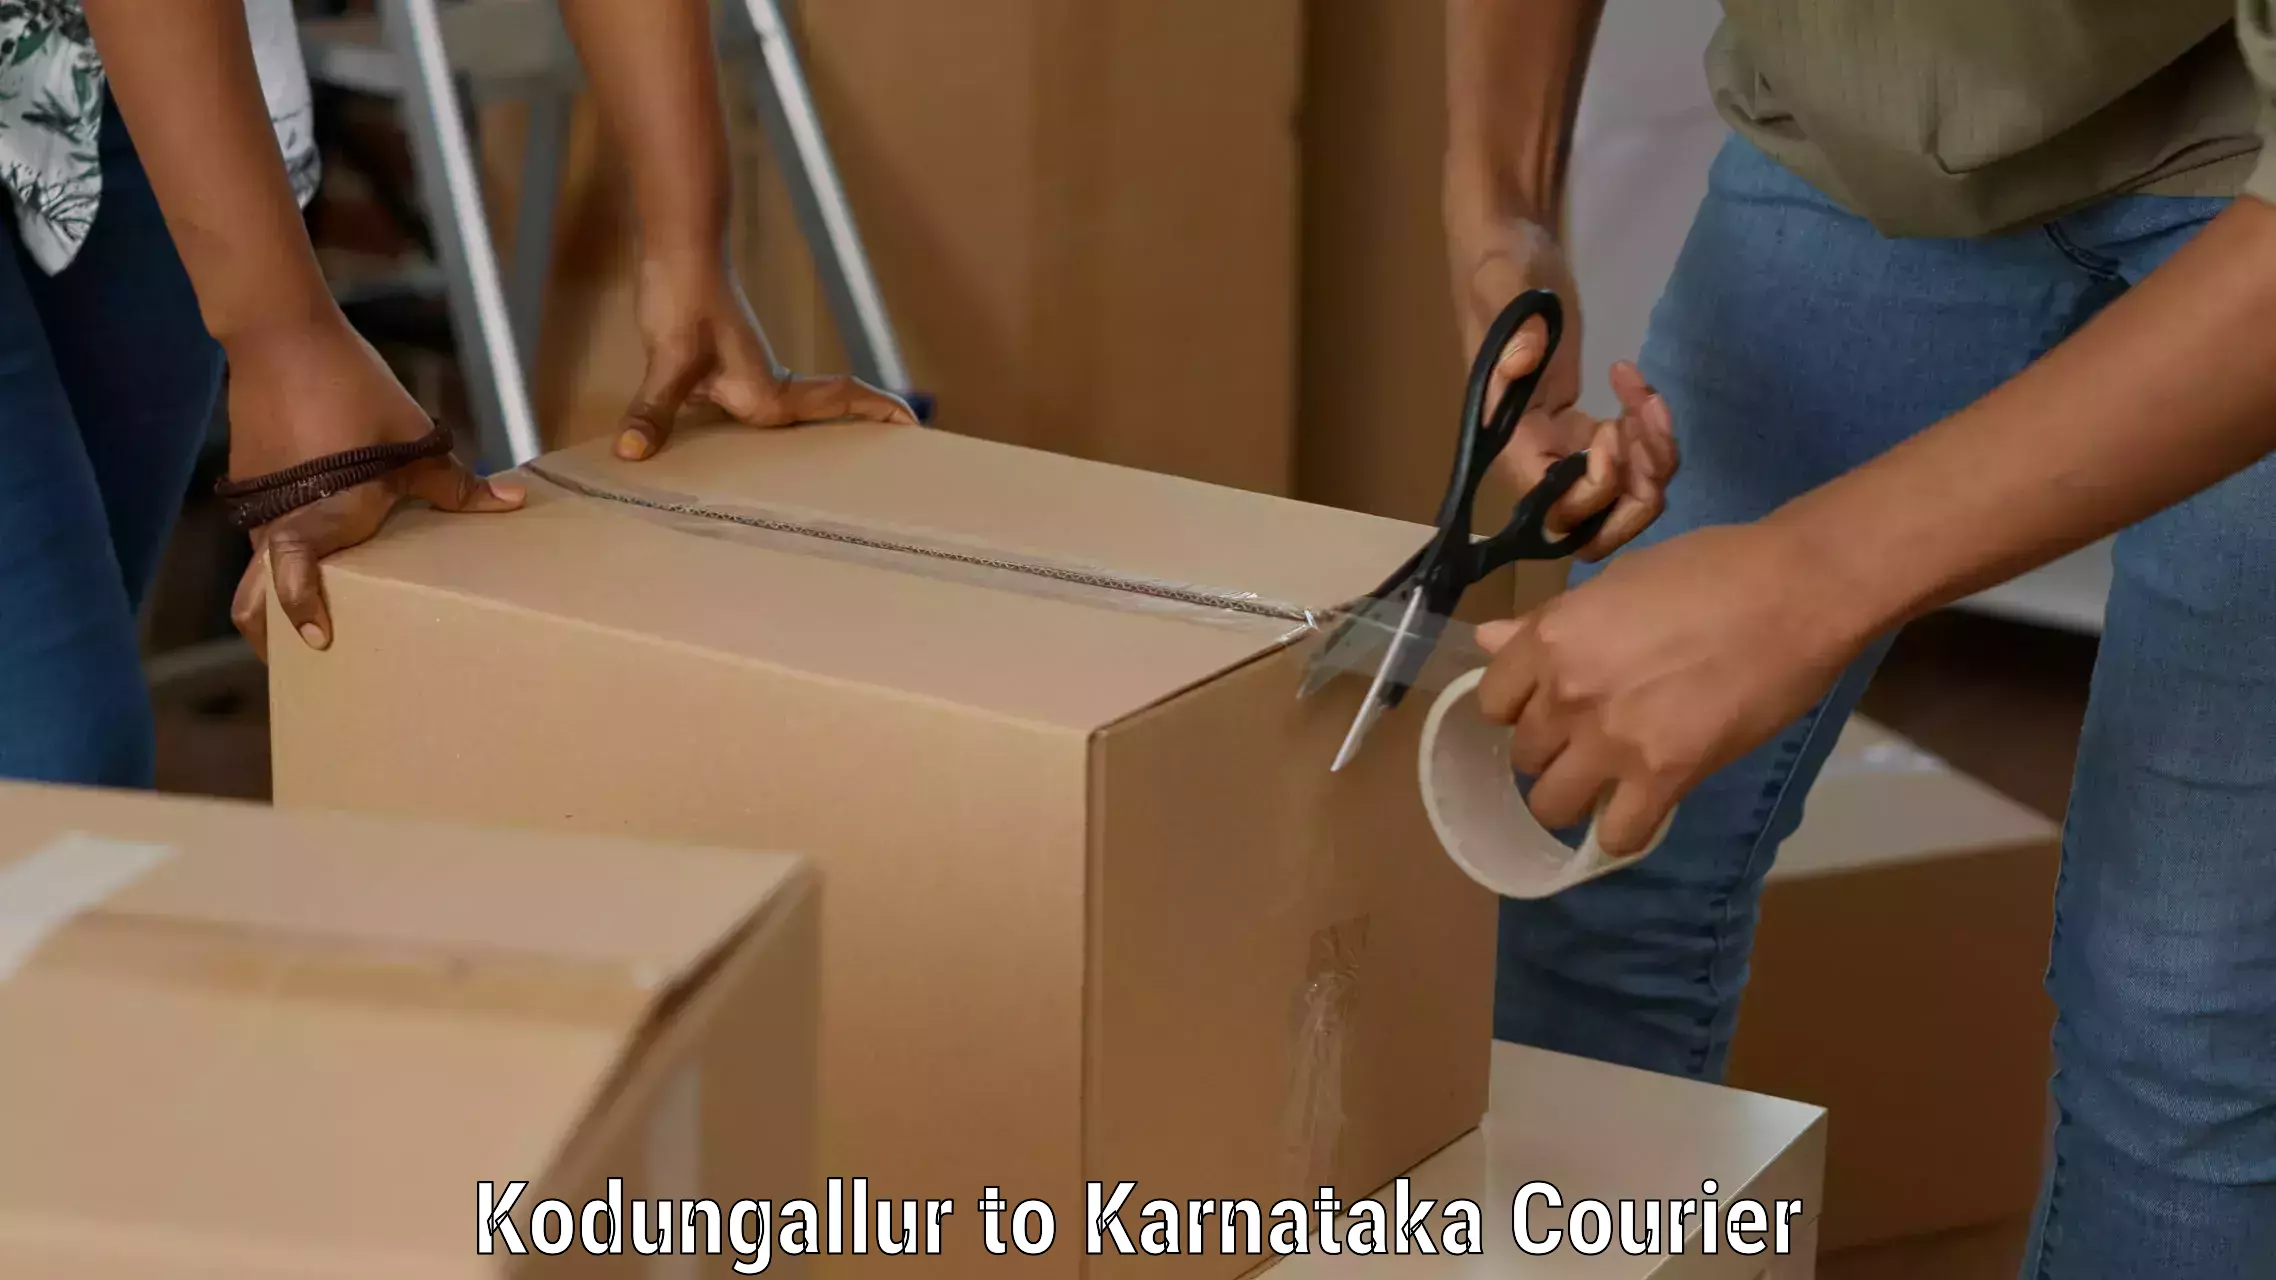 Global courier networks Kodungallur to Pavagada